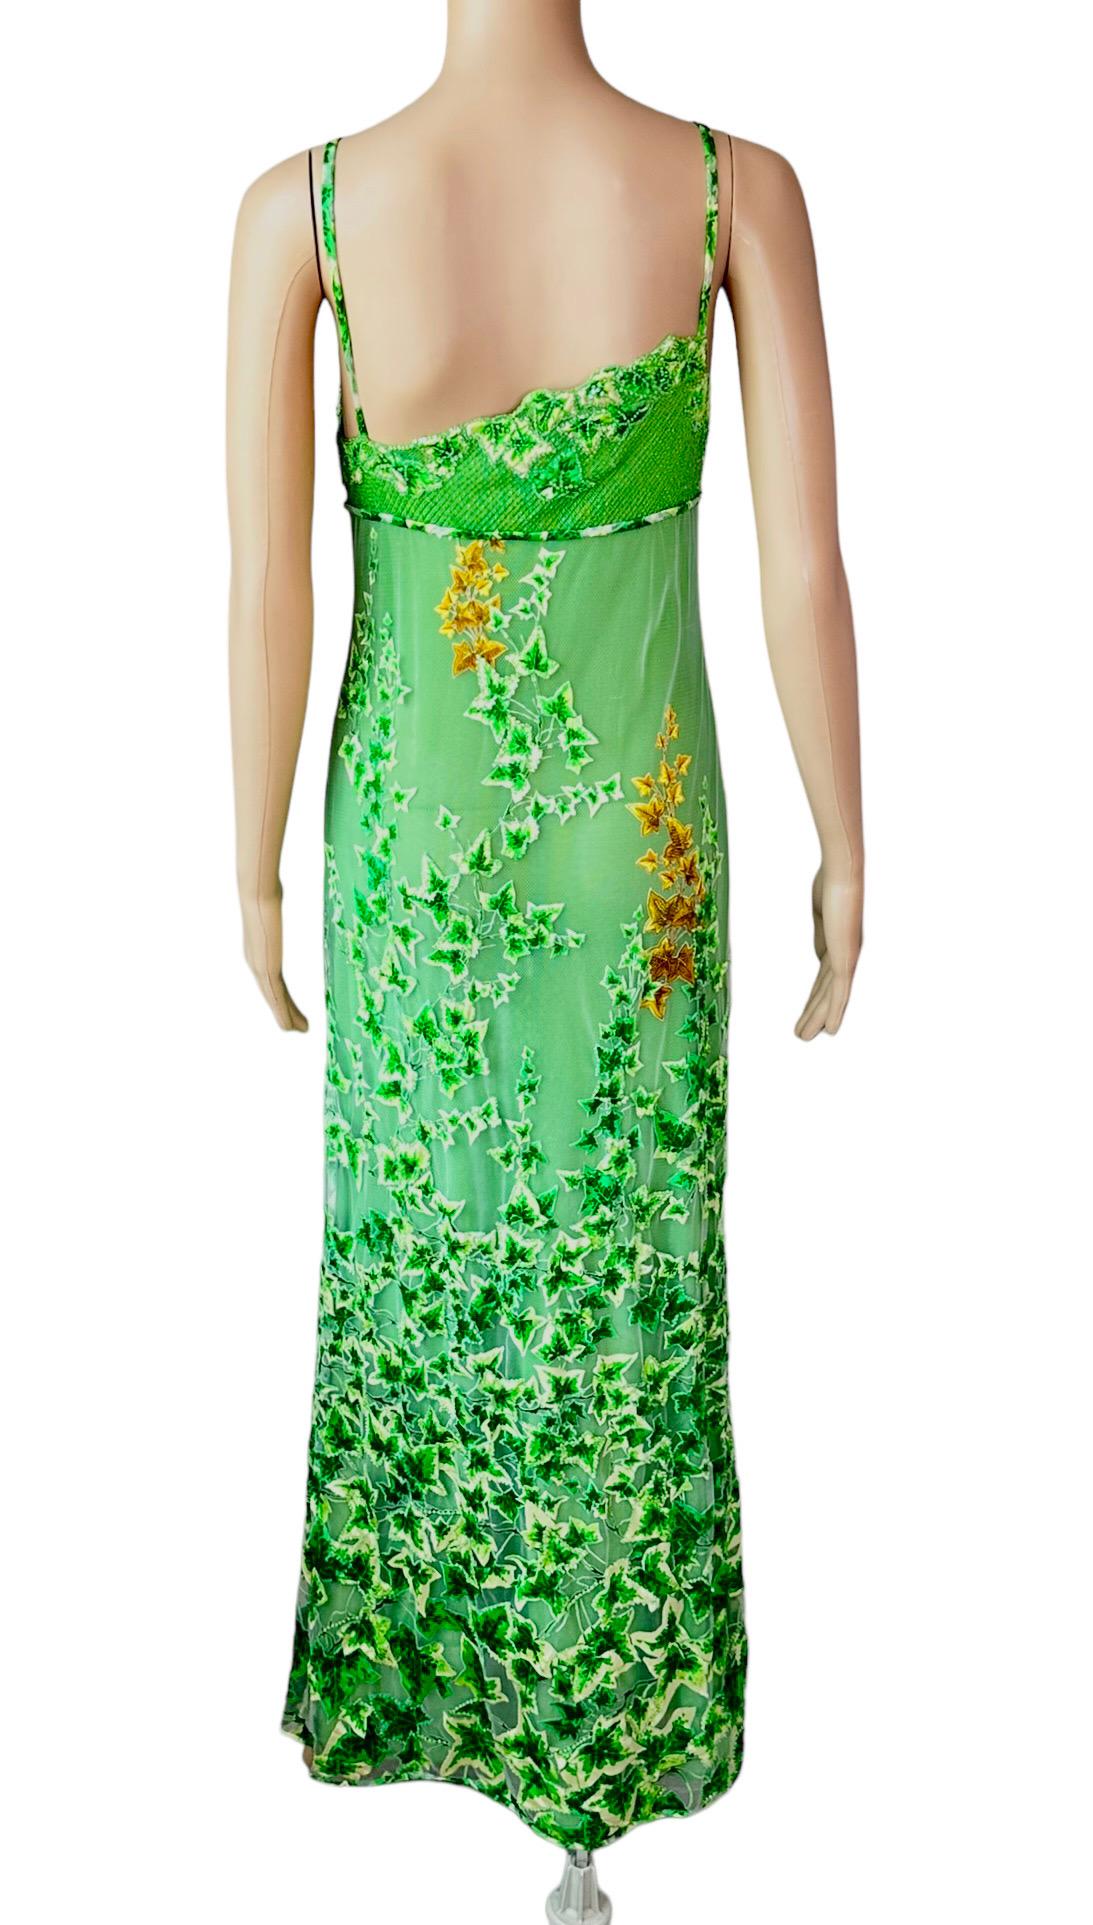 Gianni Versace S/S 1997 Runway Embellished Sheer Lace Shawl Evening Dress Gown  For Sale 3